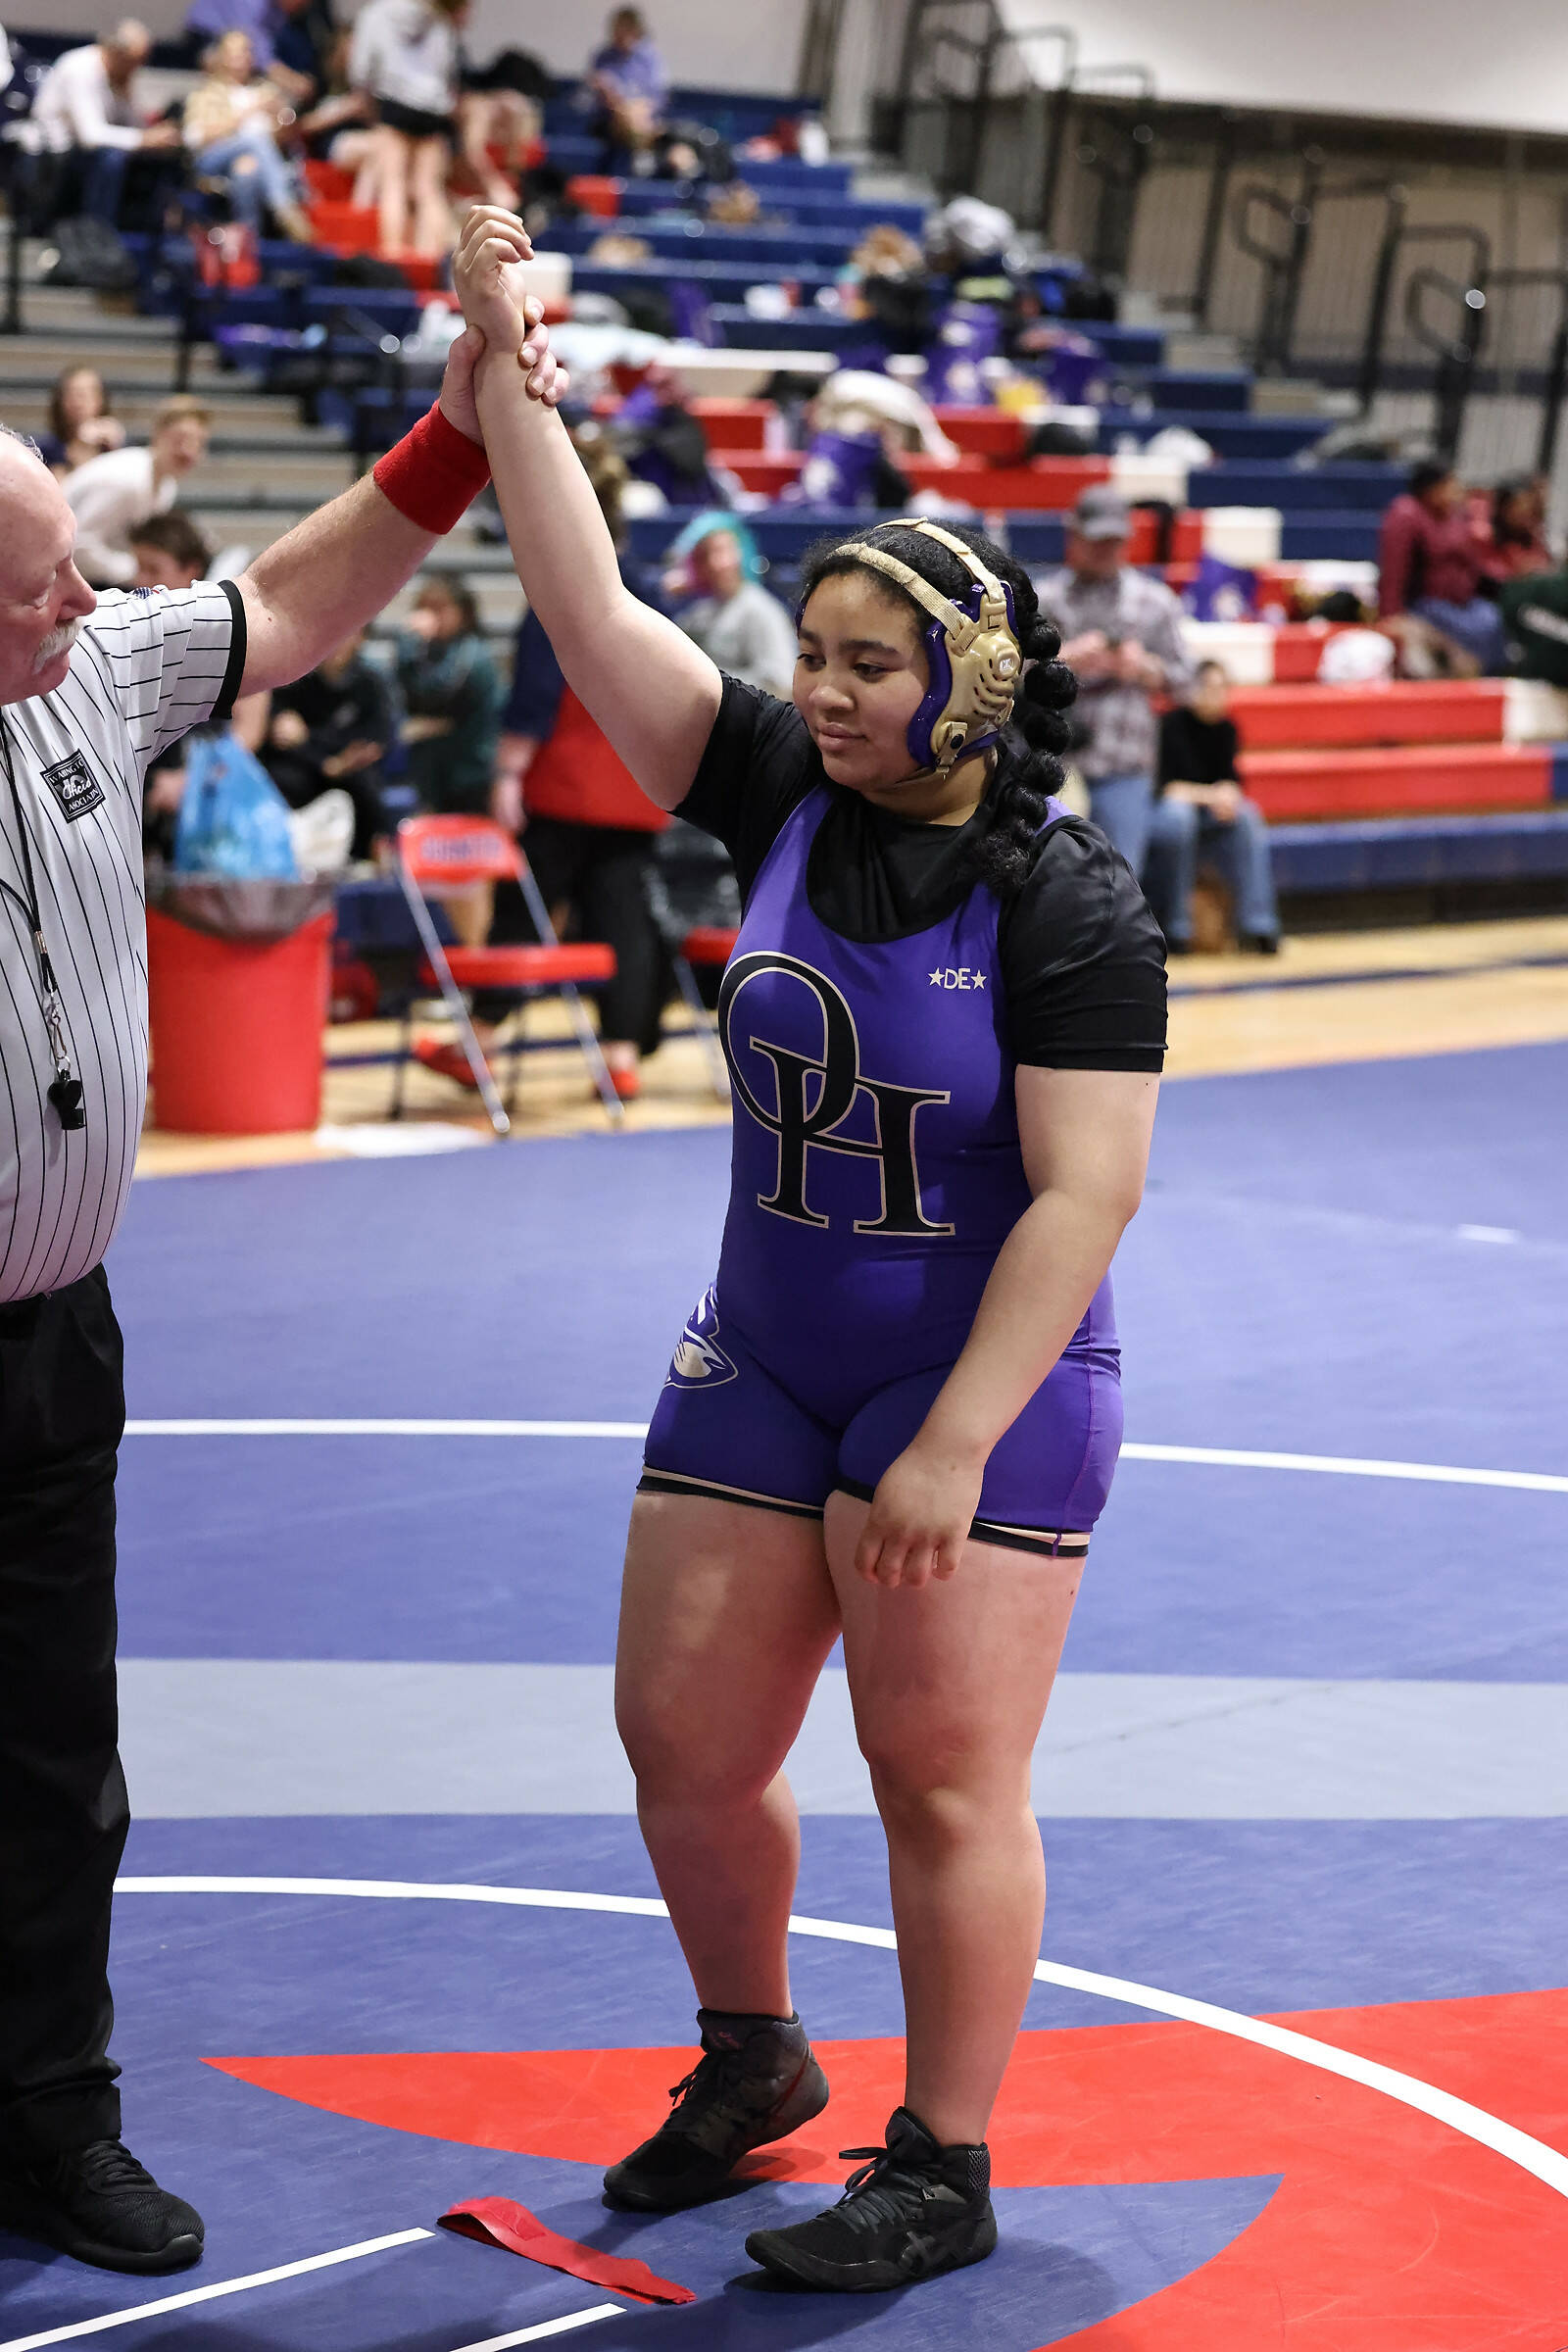 Photo by John Fisken
Oliva Hudson placed first in her weight class at the sub-regional tournament Feb. 3, the only Wildcat to do so.